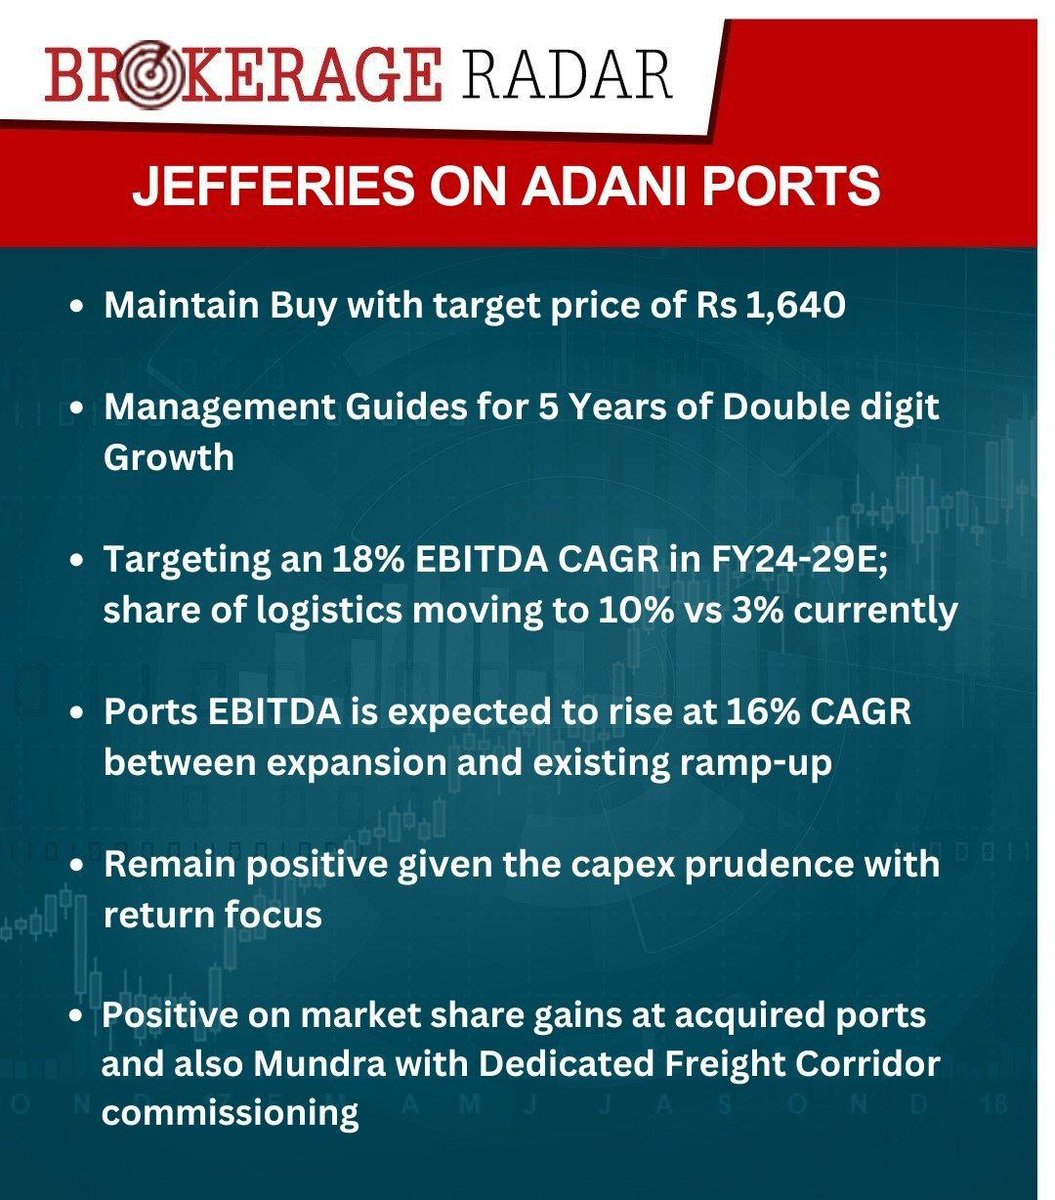 Jefferies on Adani Ports maintains buy with target price of Rs 1,640